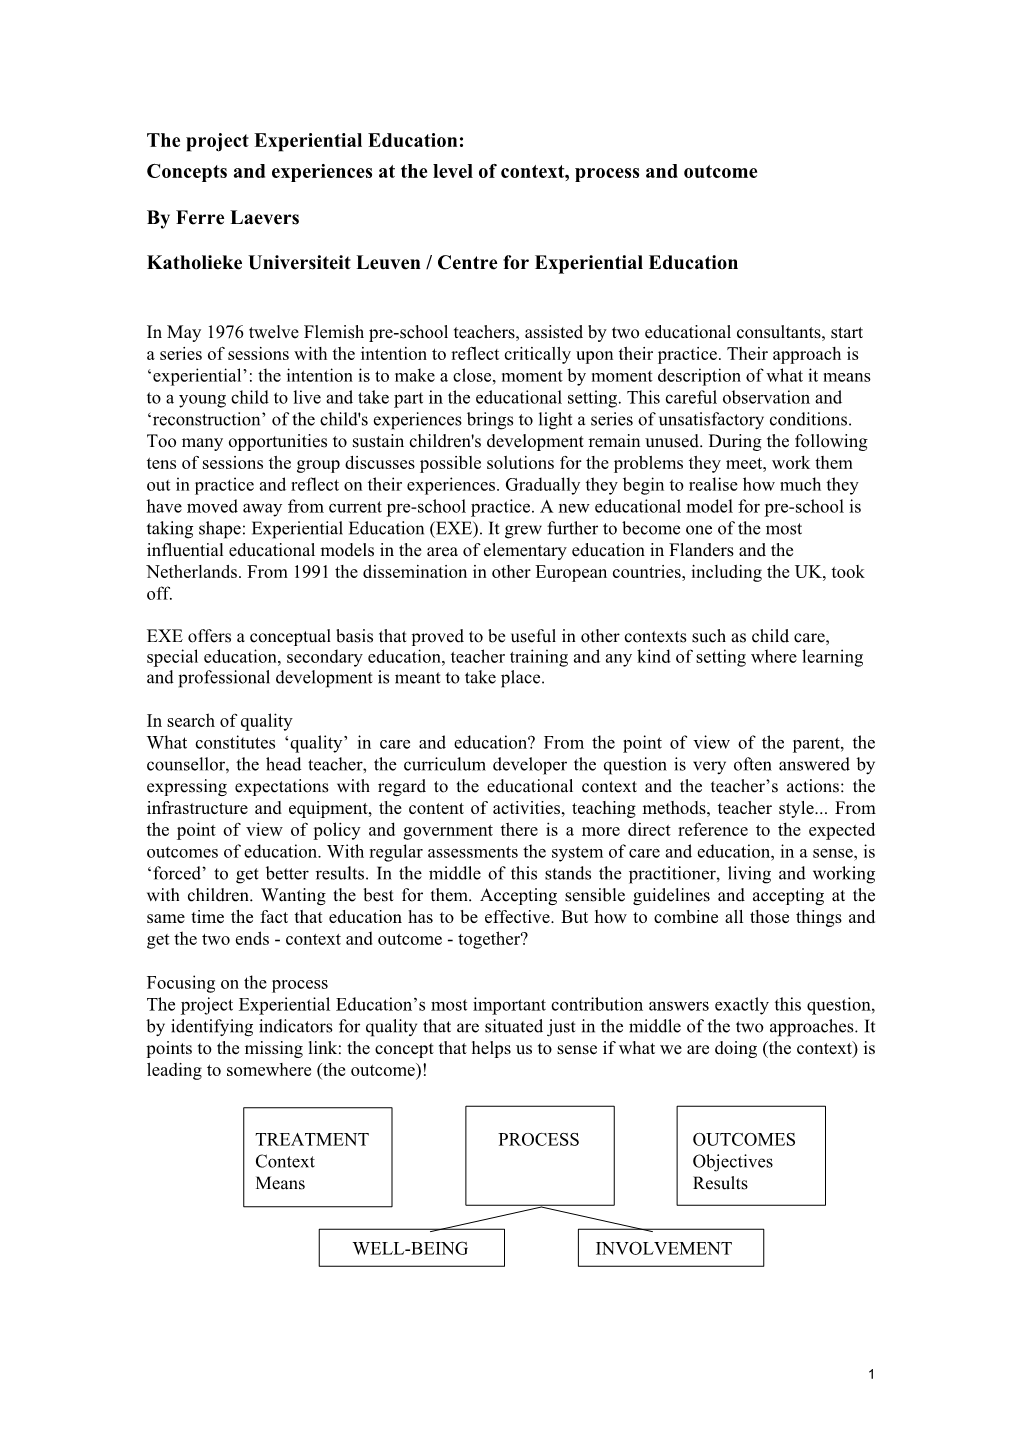 The Project Experiential Education: Concepts and Experiences at the Level of Context, Process and Outcome